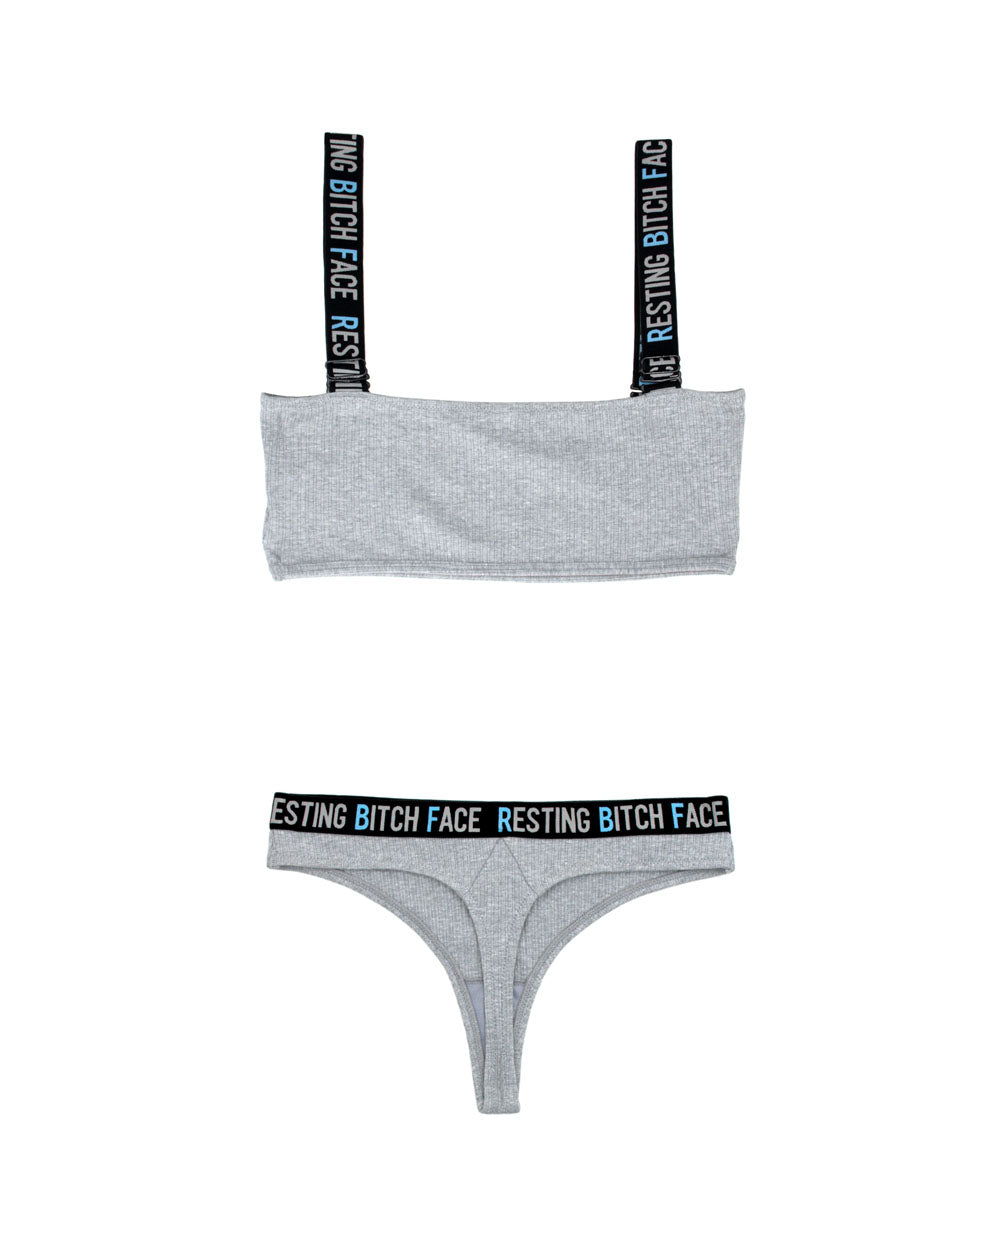 Resting Bitch Face Crop Top and Thong Panty Set - Gray - L/xl